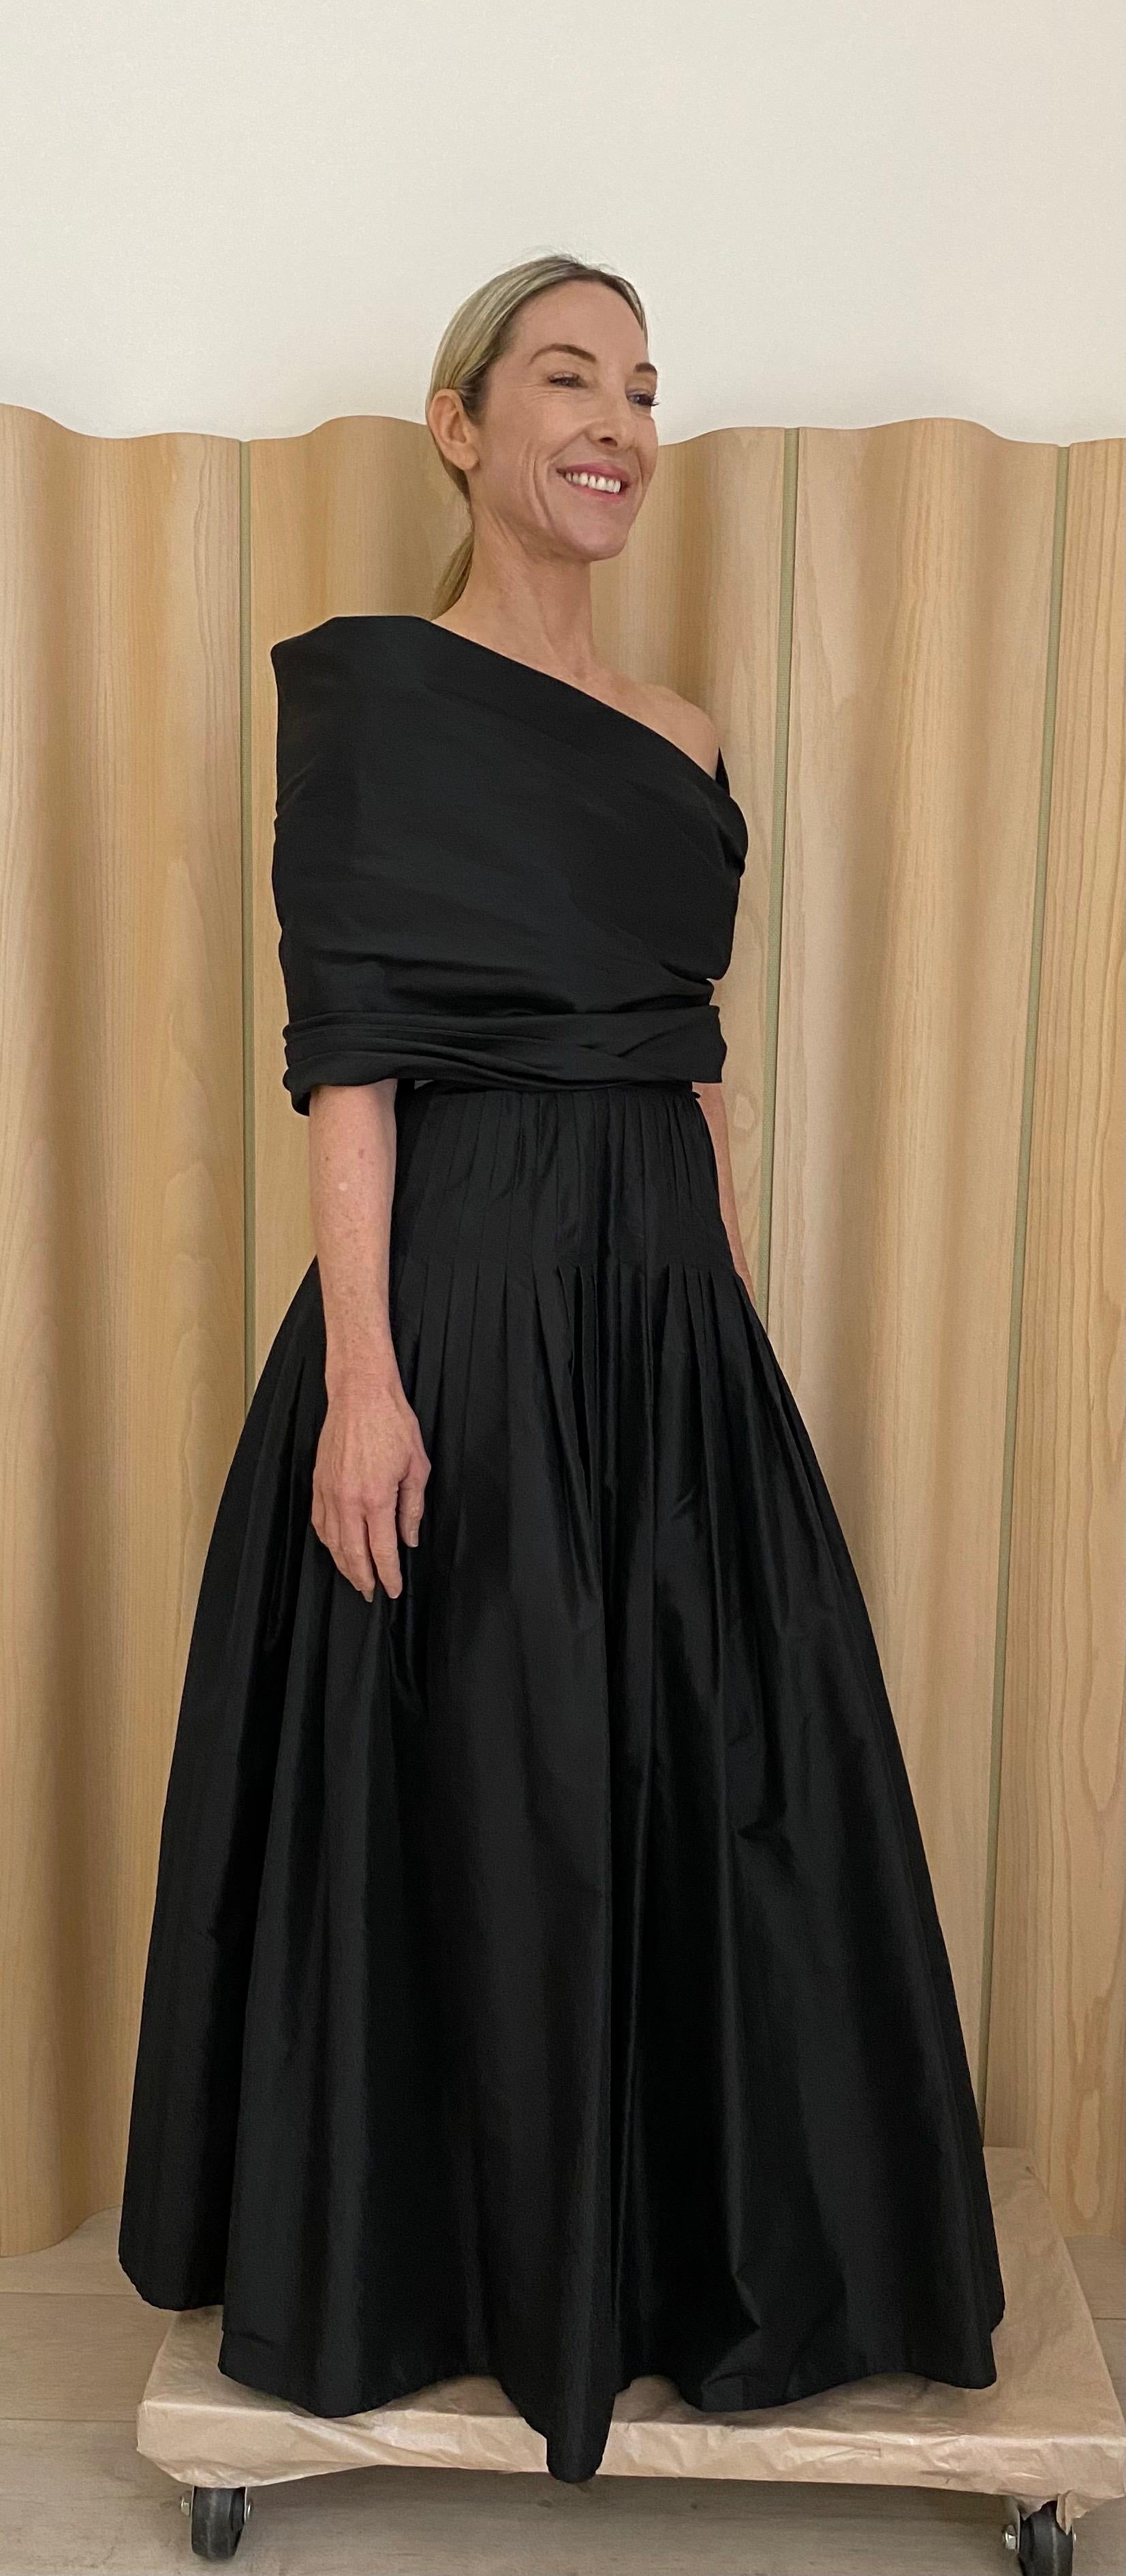 Vintage Bill Blass Black Silk taffeta gown with wrap around shoulder. 
Size: 2/ Small
Bust: 32” / Waist: 24”/ Length: 51”

*** there is some distressed on the fabric, but very minor ( see images)